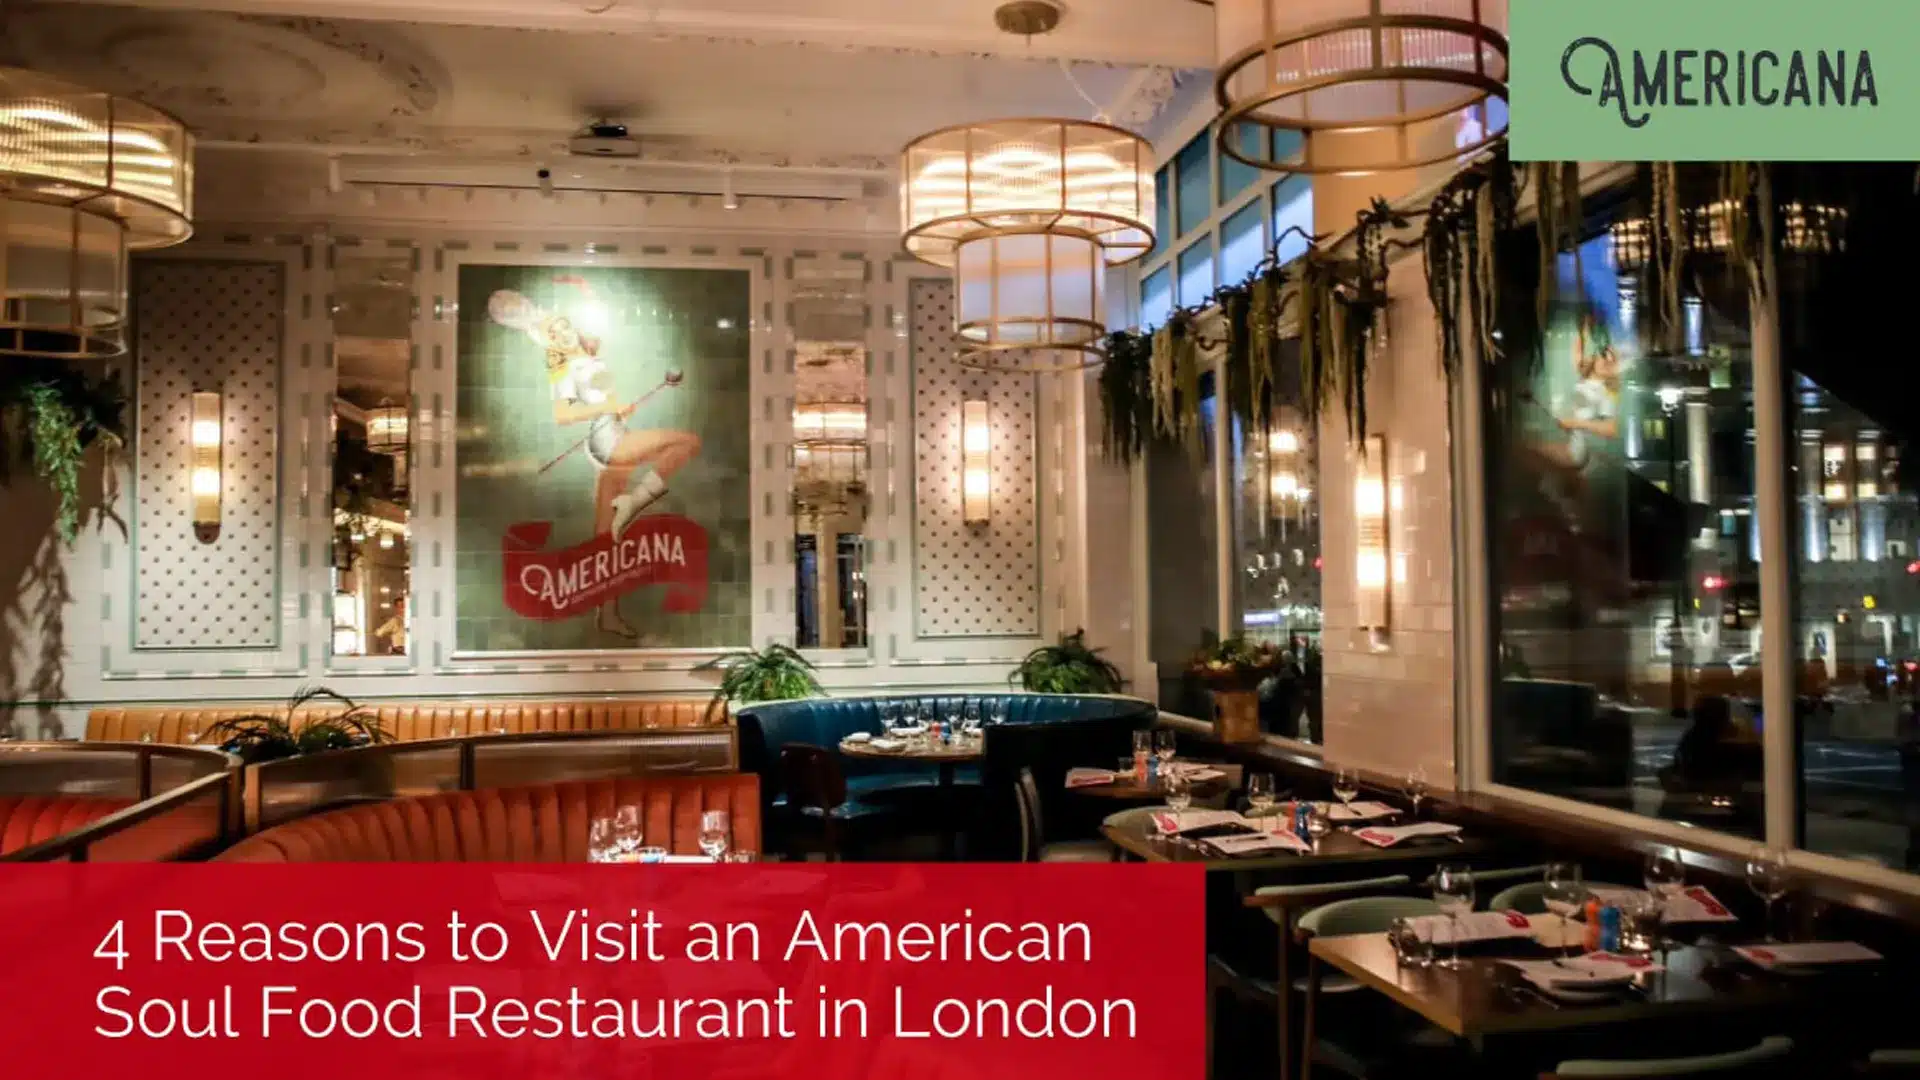 4-Reasons-to-Visit-an-American-Soul-Food-Restaurant-in-London-min